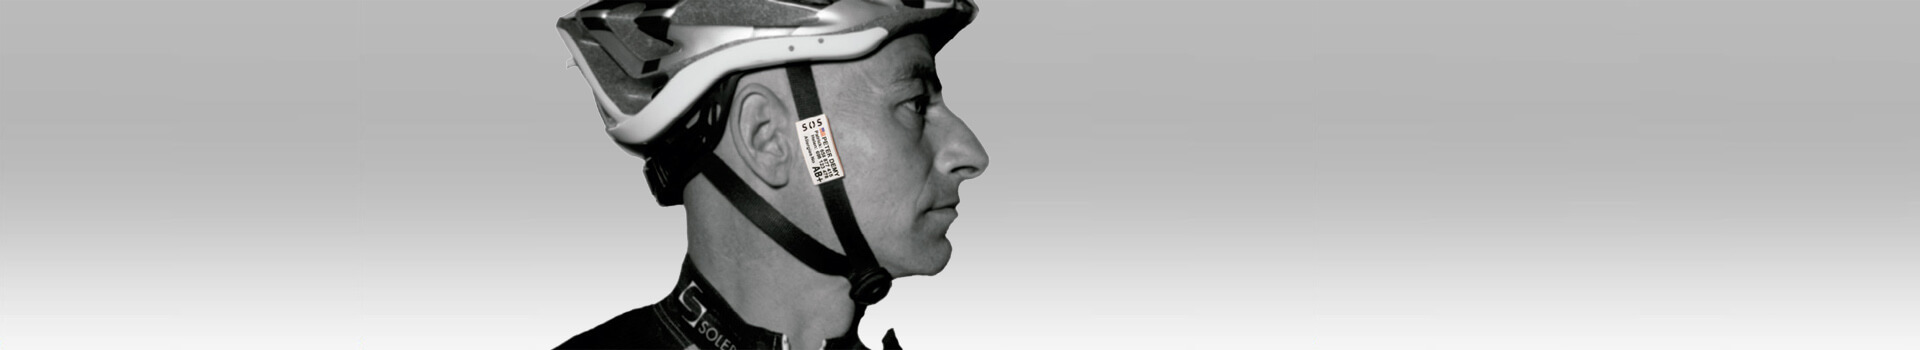 Security identification plate for cyclists